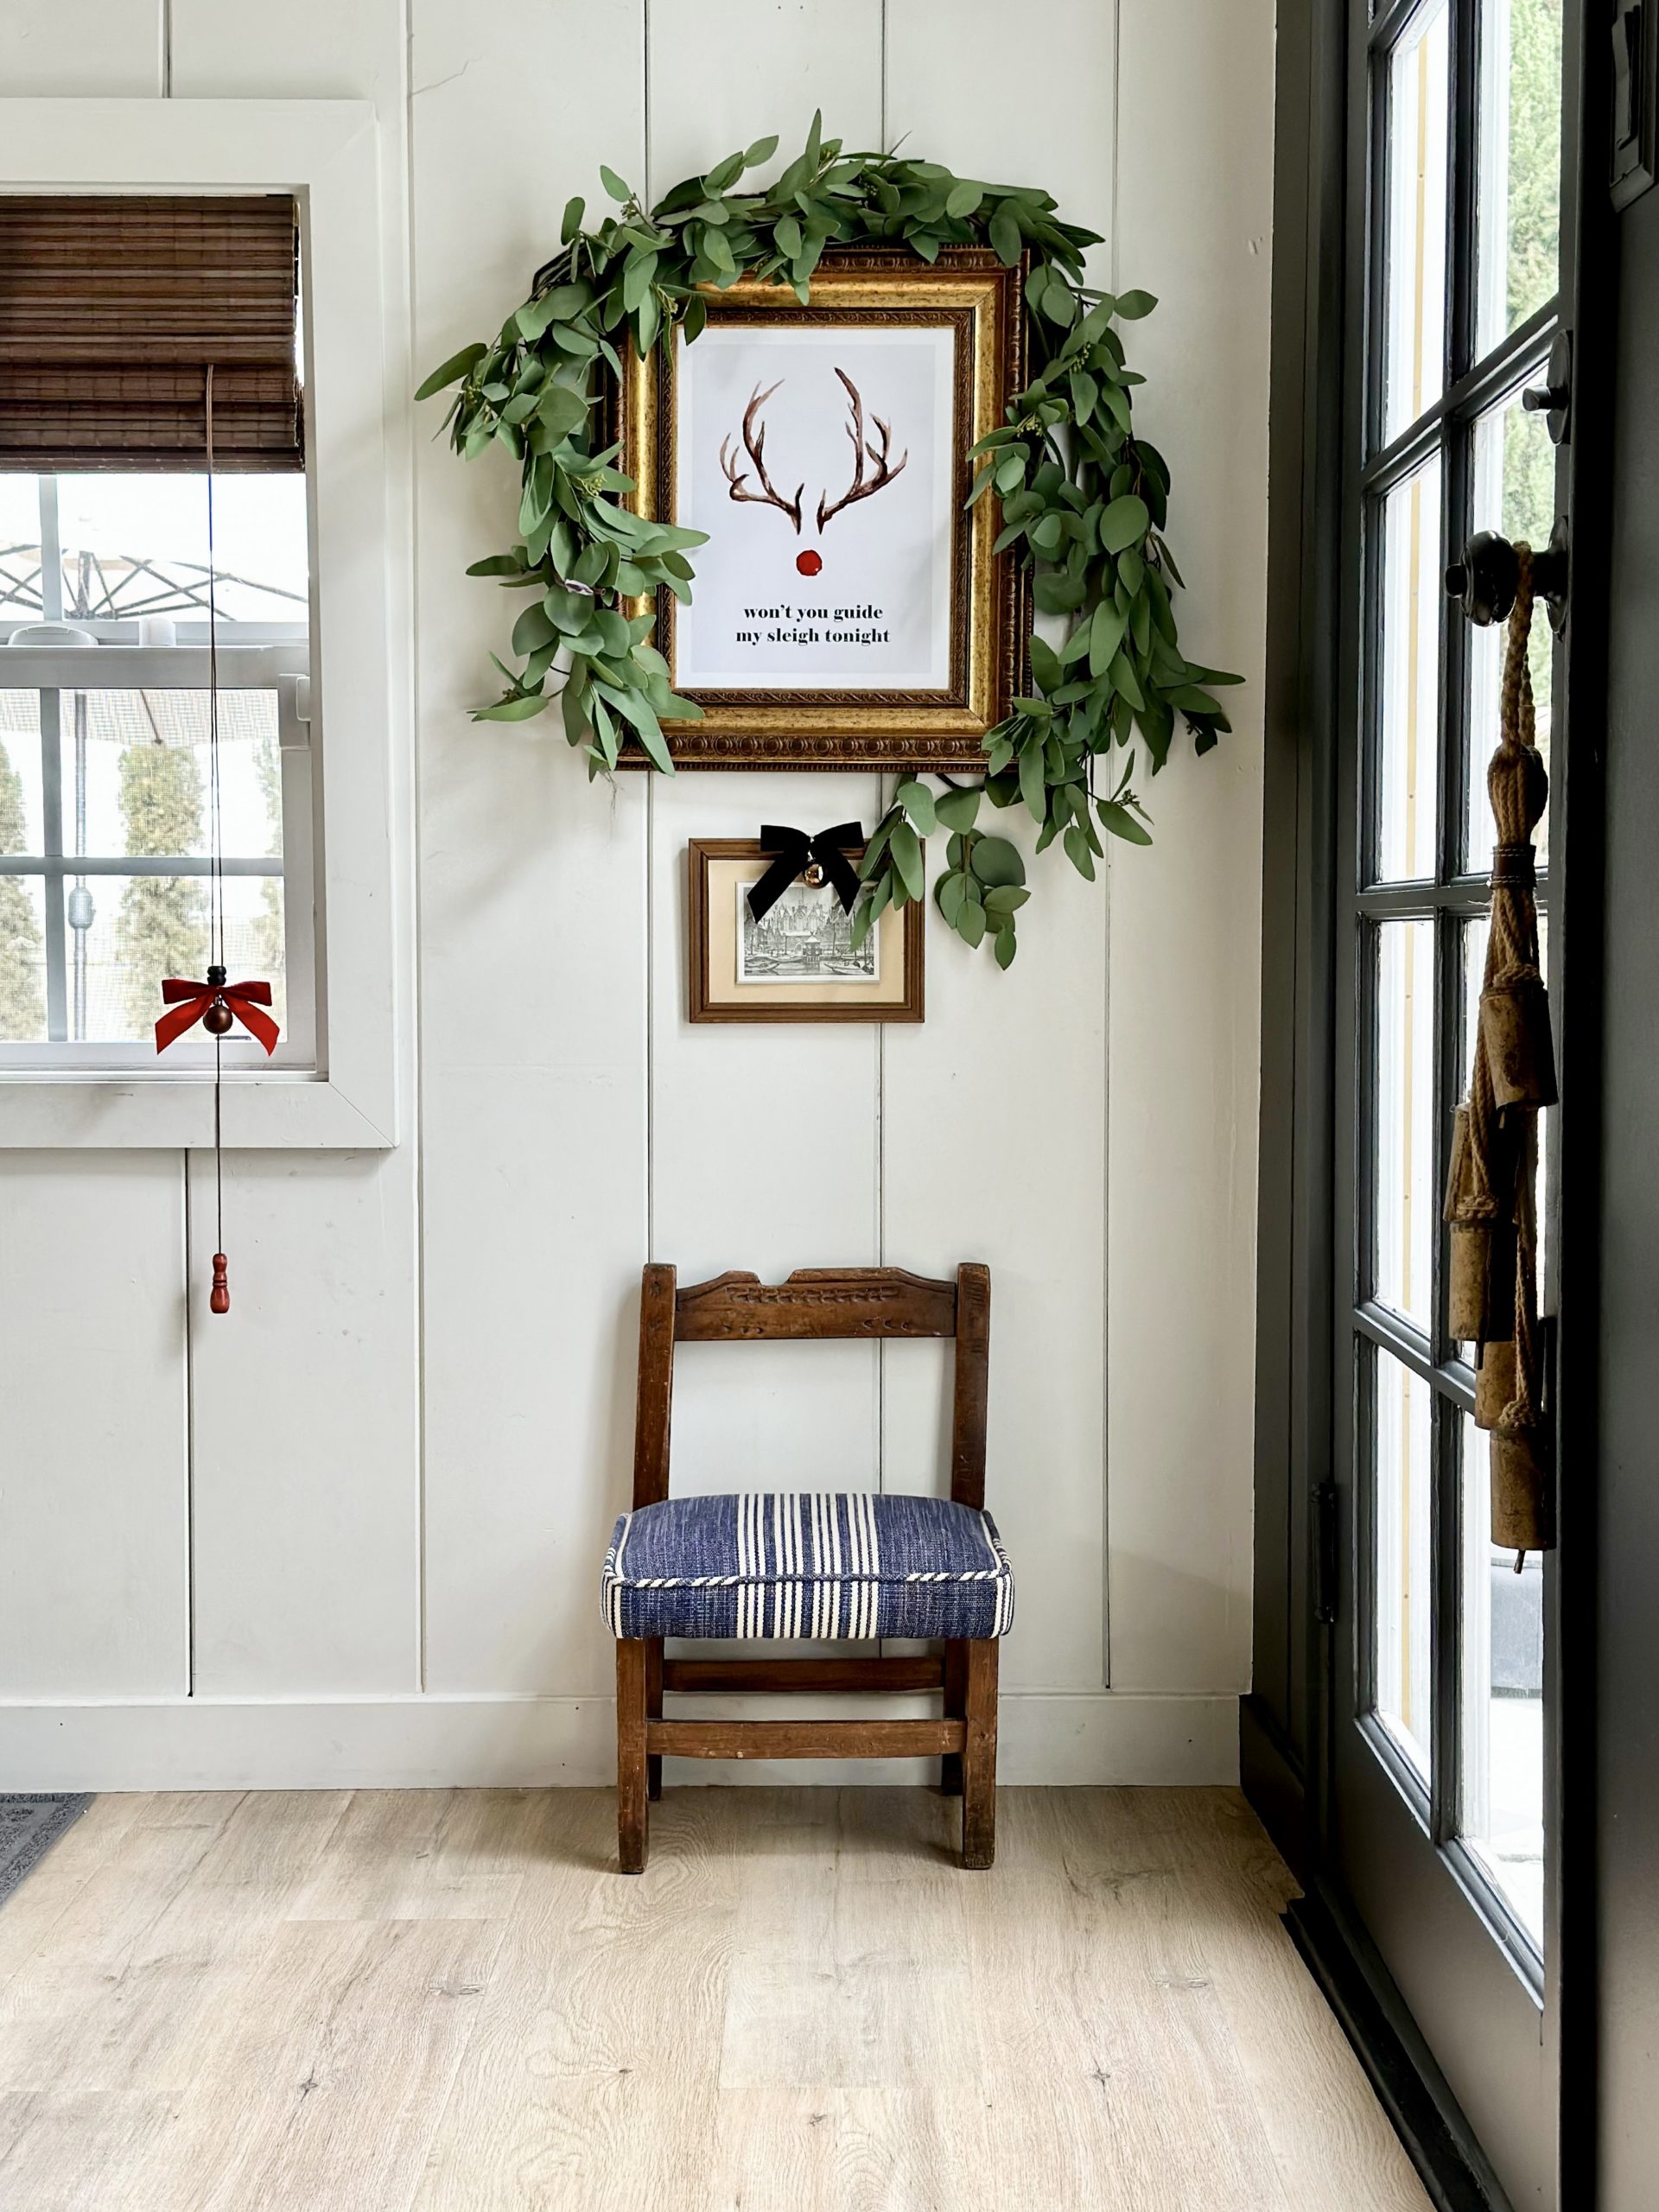 easy and budget friendly ways to decorate for christmas, decorating with bows, decorating art for christmas, christmas decor ideas, bows on art, christmas art, decorating art for christmas, mopboard black benjamin moore, swiss coffee paint color, white paint color, bow in window, shiplap walls, thrifted christmas, bells on door, laminate floors